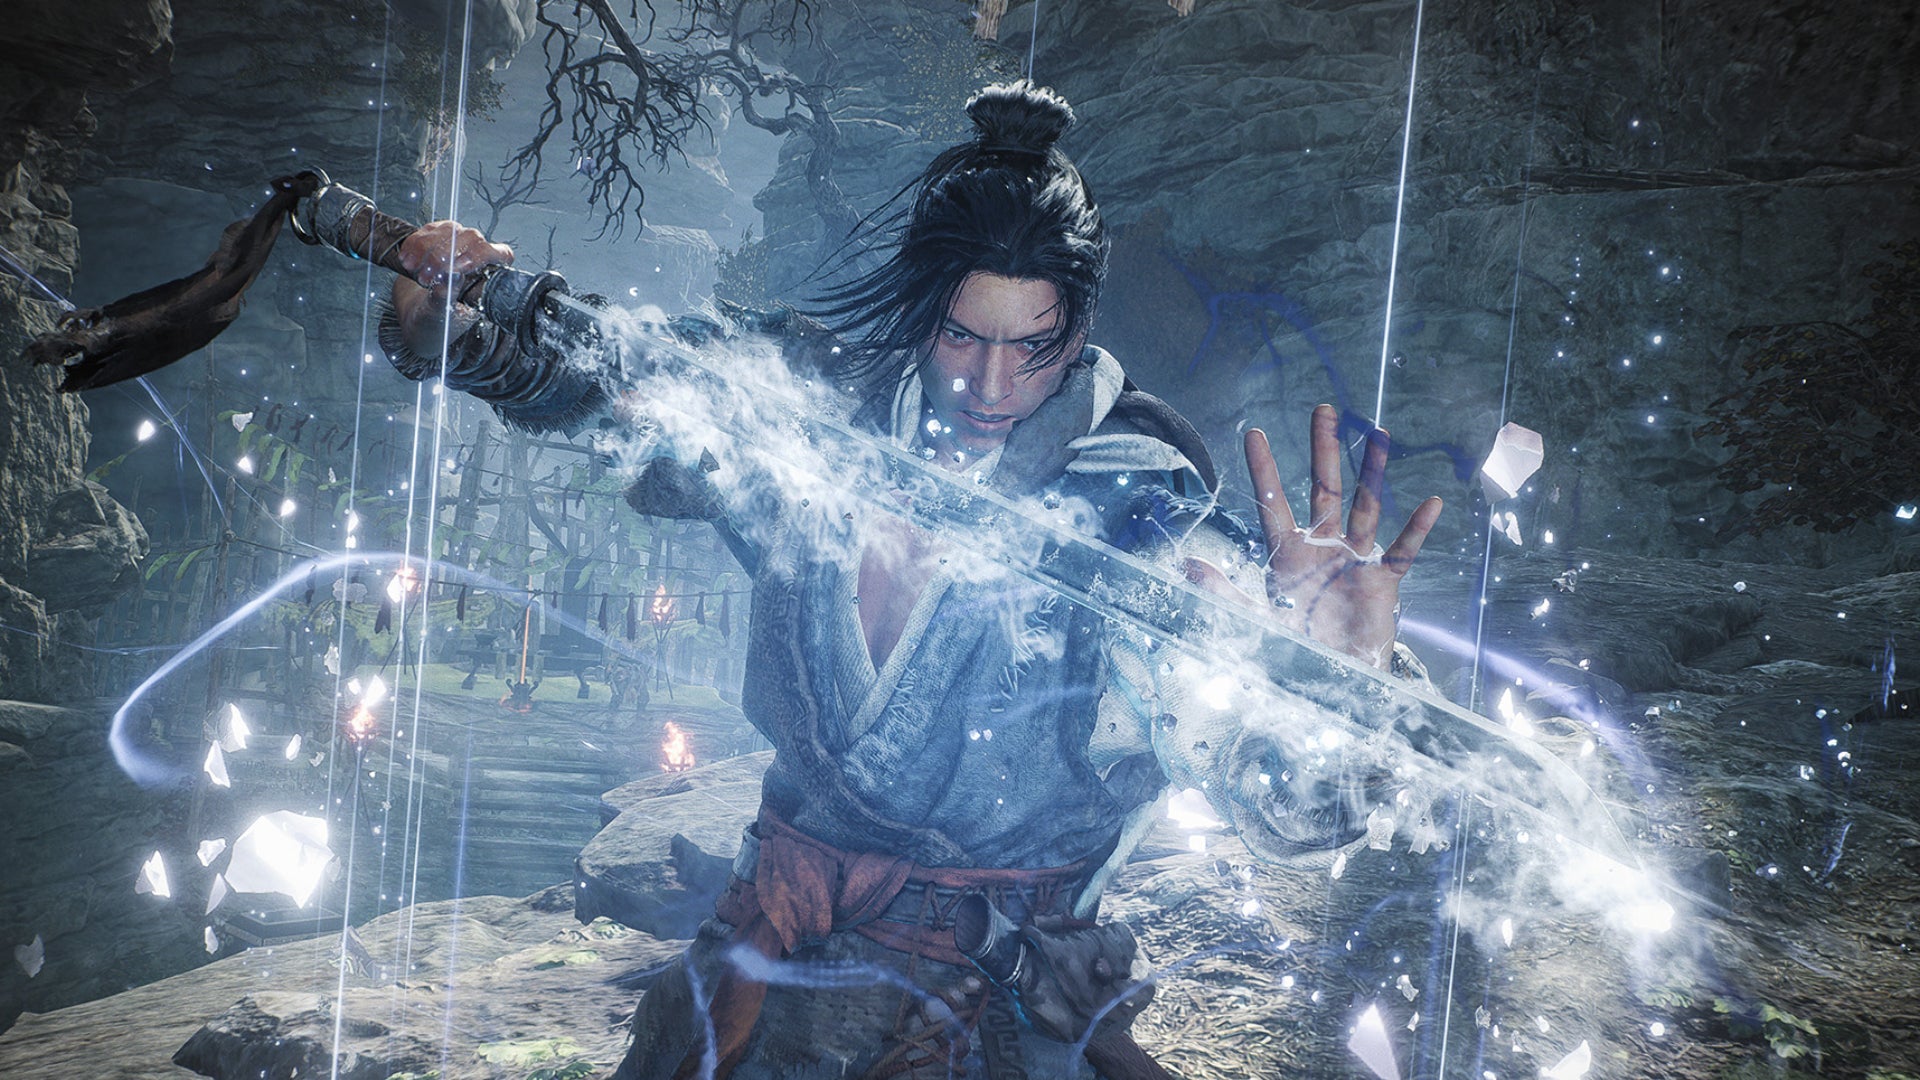 The protagonist of Wo Long: Fallen Dynasty brandishes an Ice Sword in front of the camera.